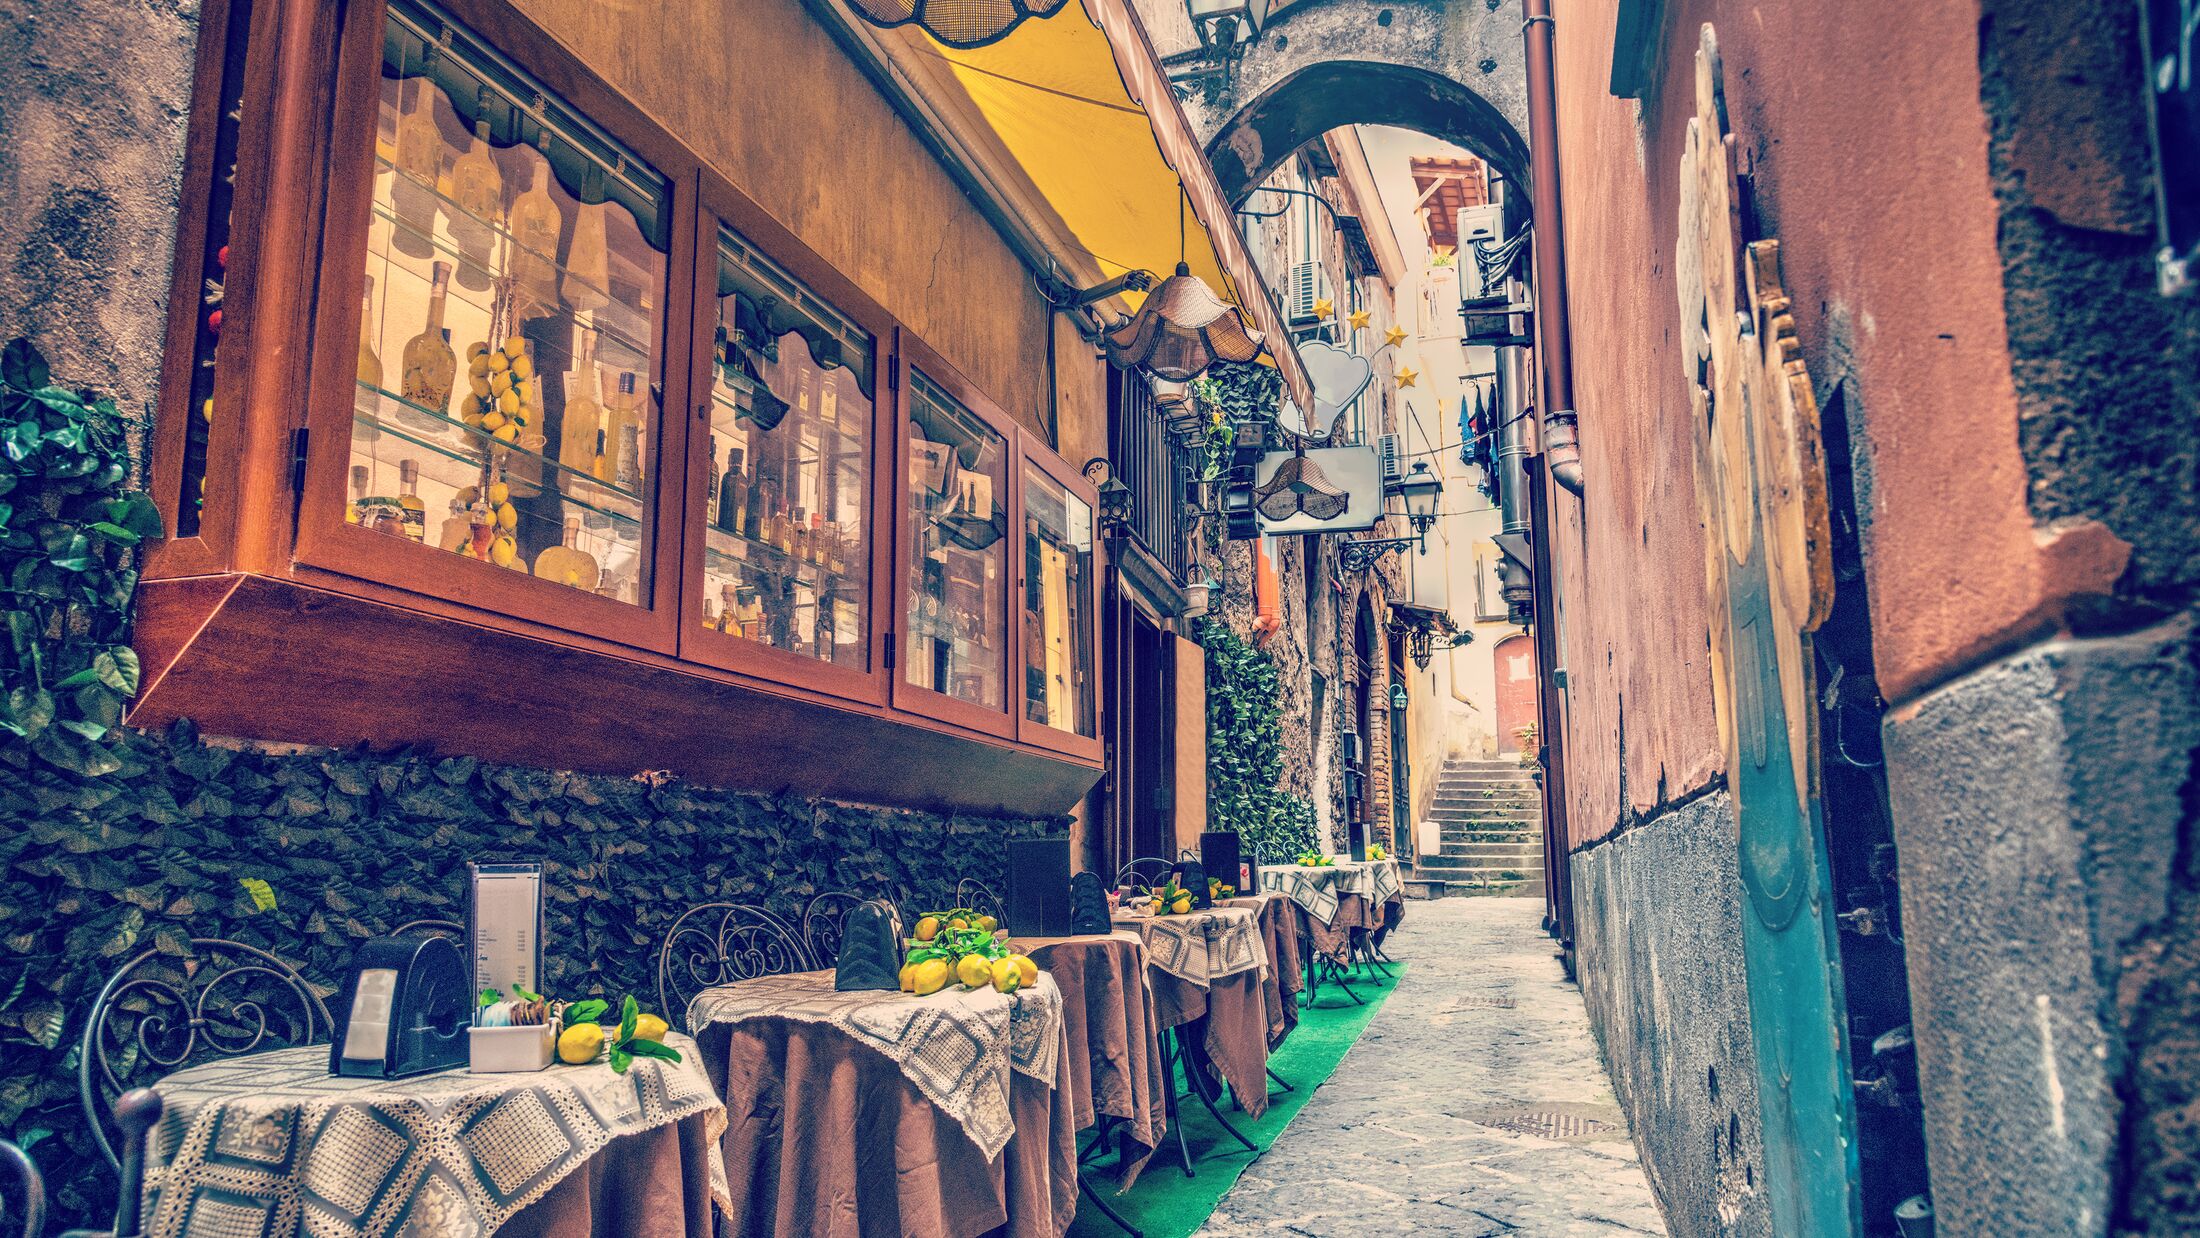 Rustic tables in a narrow alley in world famous Sorrento. Campania, Italy